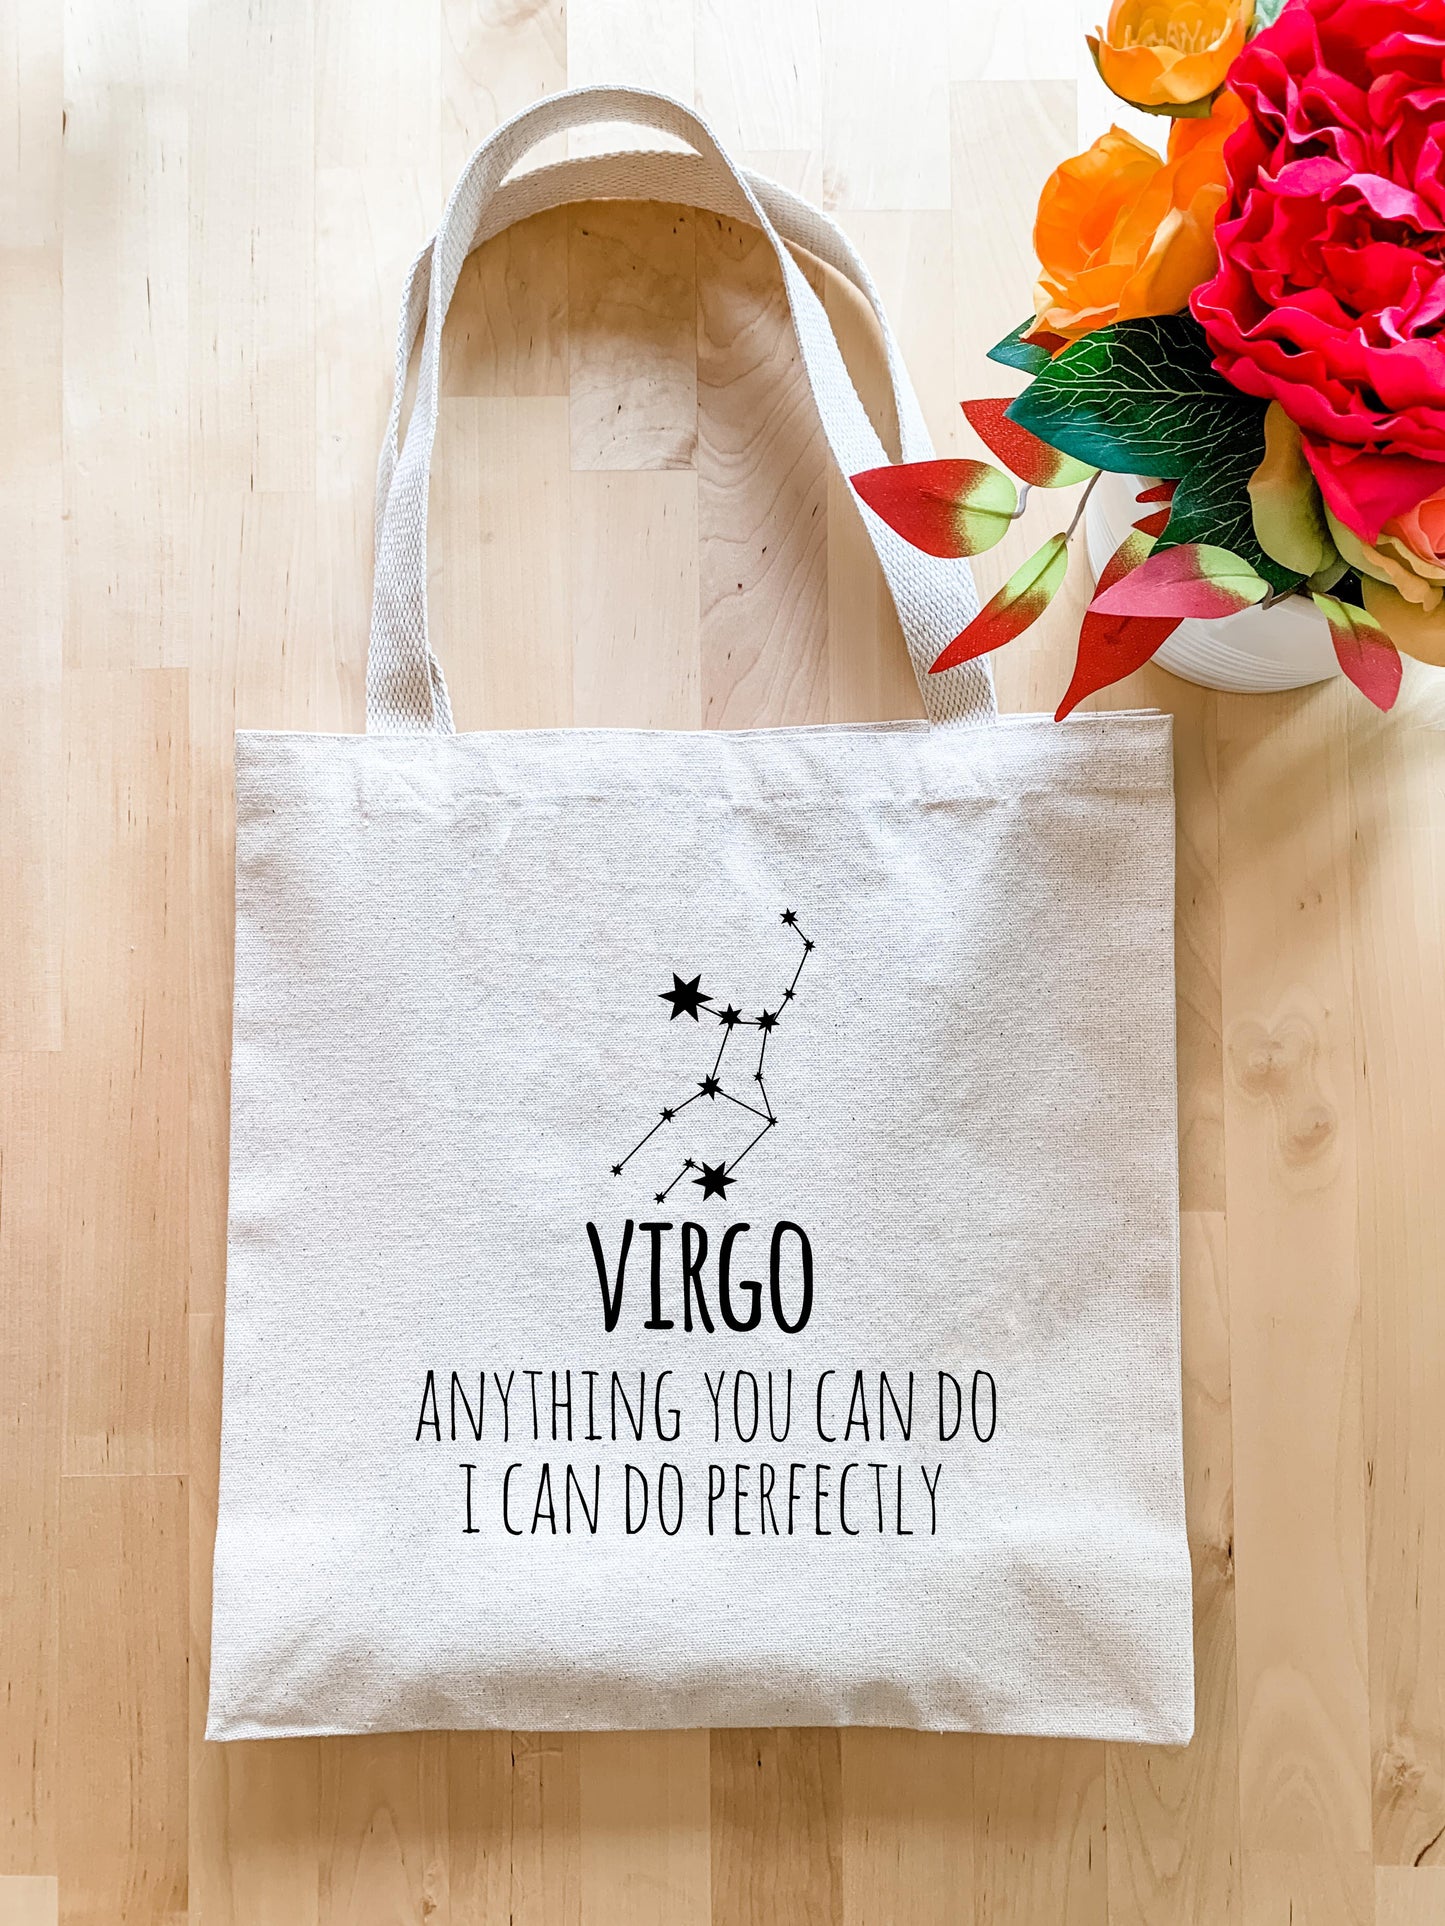 Virgo Zodiac (Anything You Can Do I Can Do Perfectly) - Tote Bag - MoonlightMakers